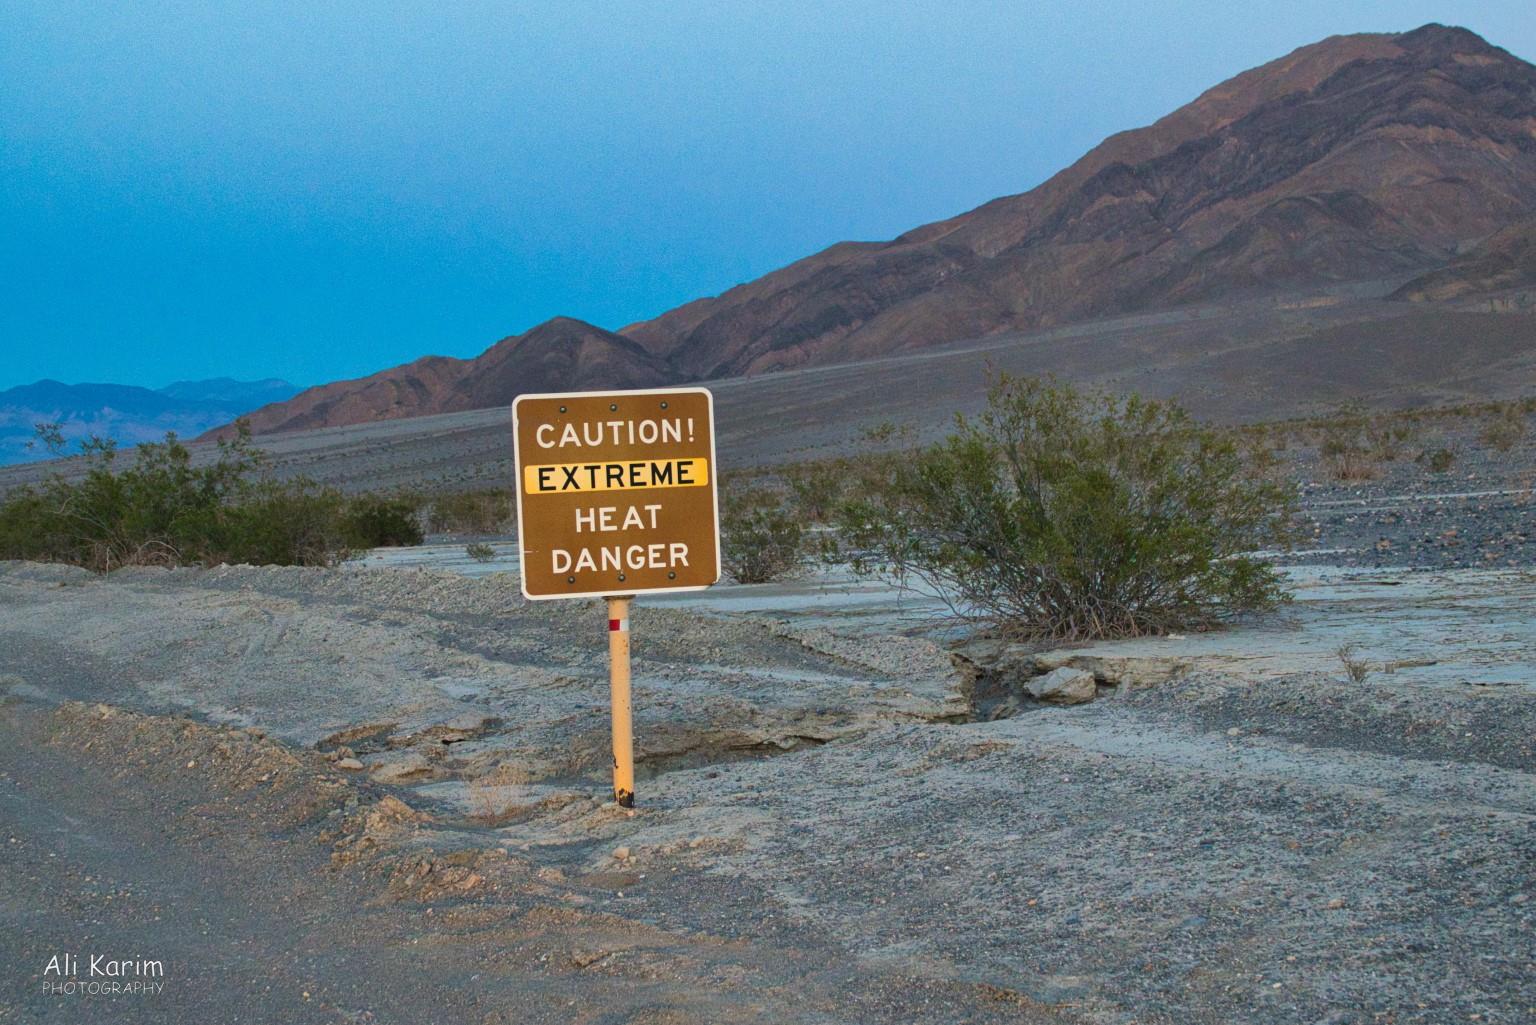 Death Valley National Park, June 2020, Need to be extremely careful; warnings like these jolt you